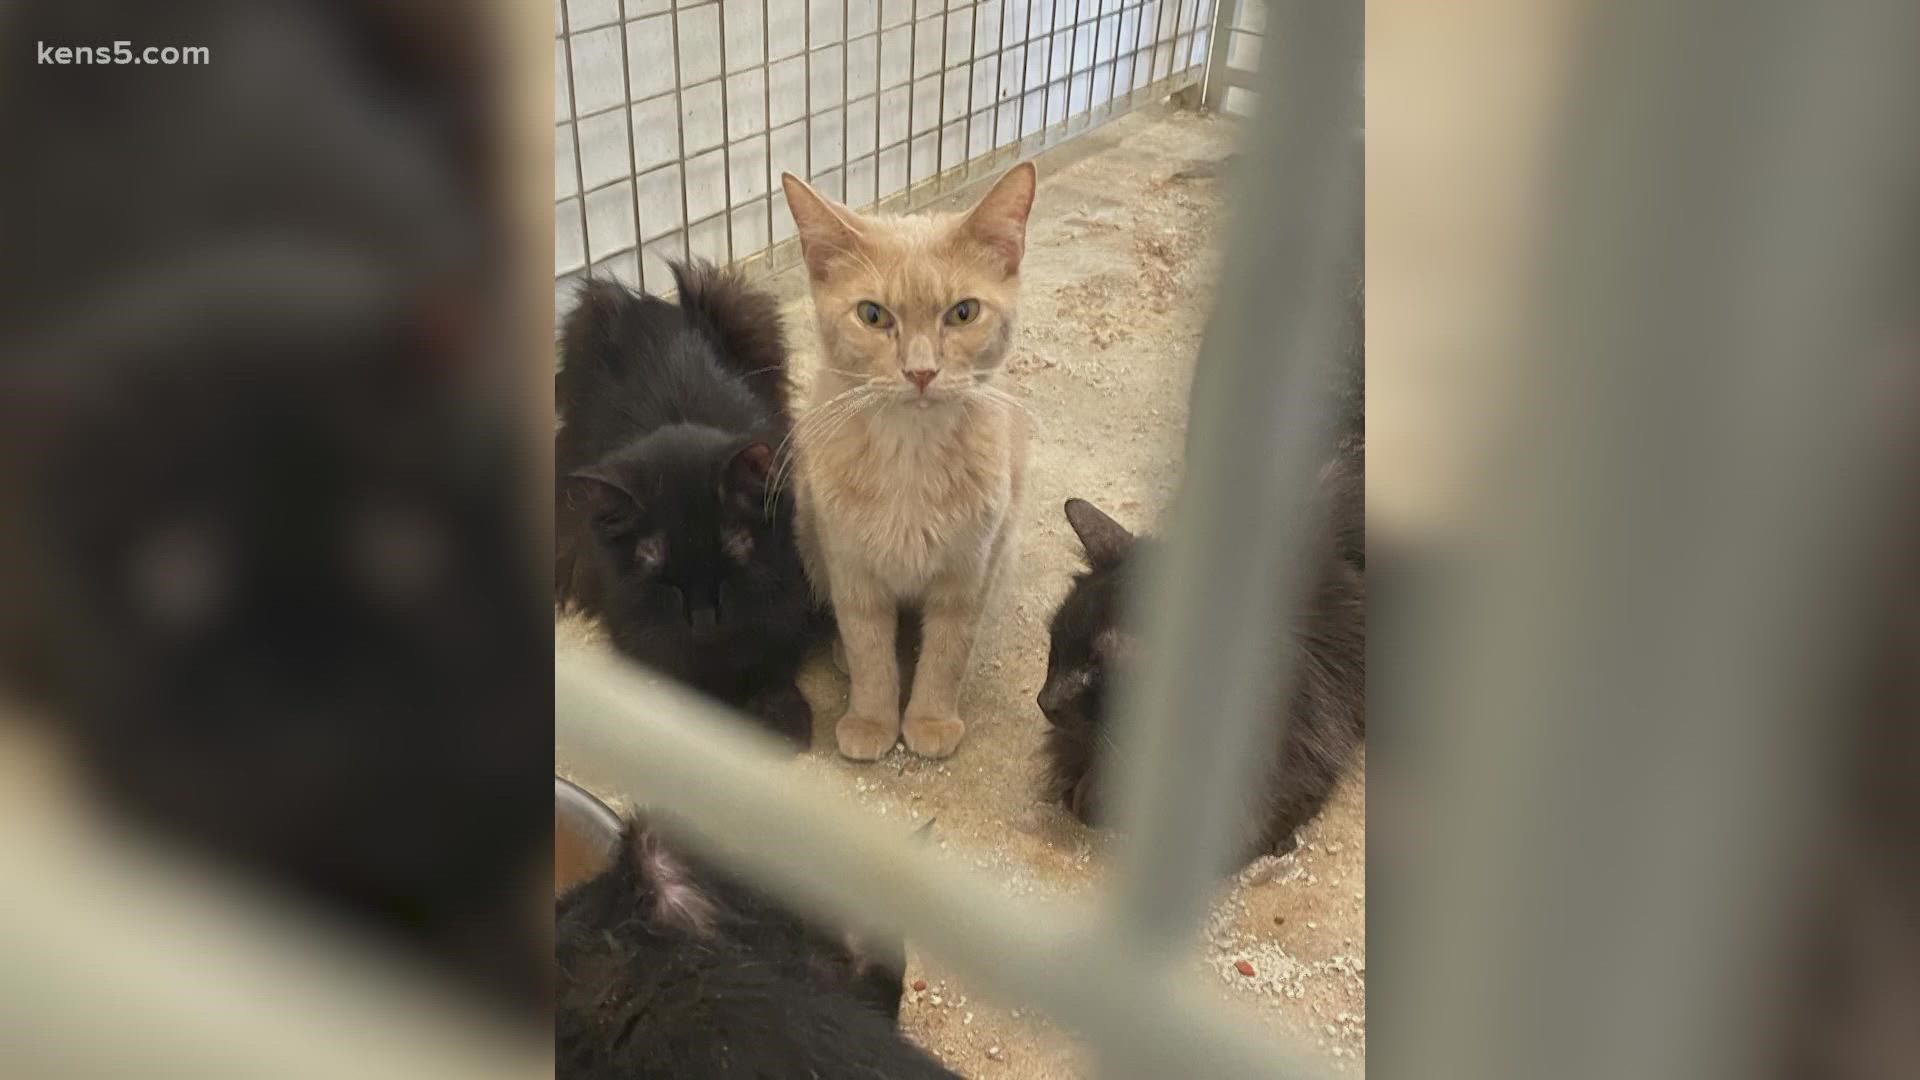 Advocates say the cats were rescued from dire conditions at a Somerset residence. But confusion lingers about their former owner, who helps rescue animals.